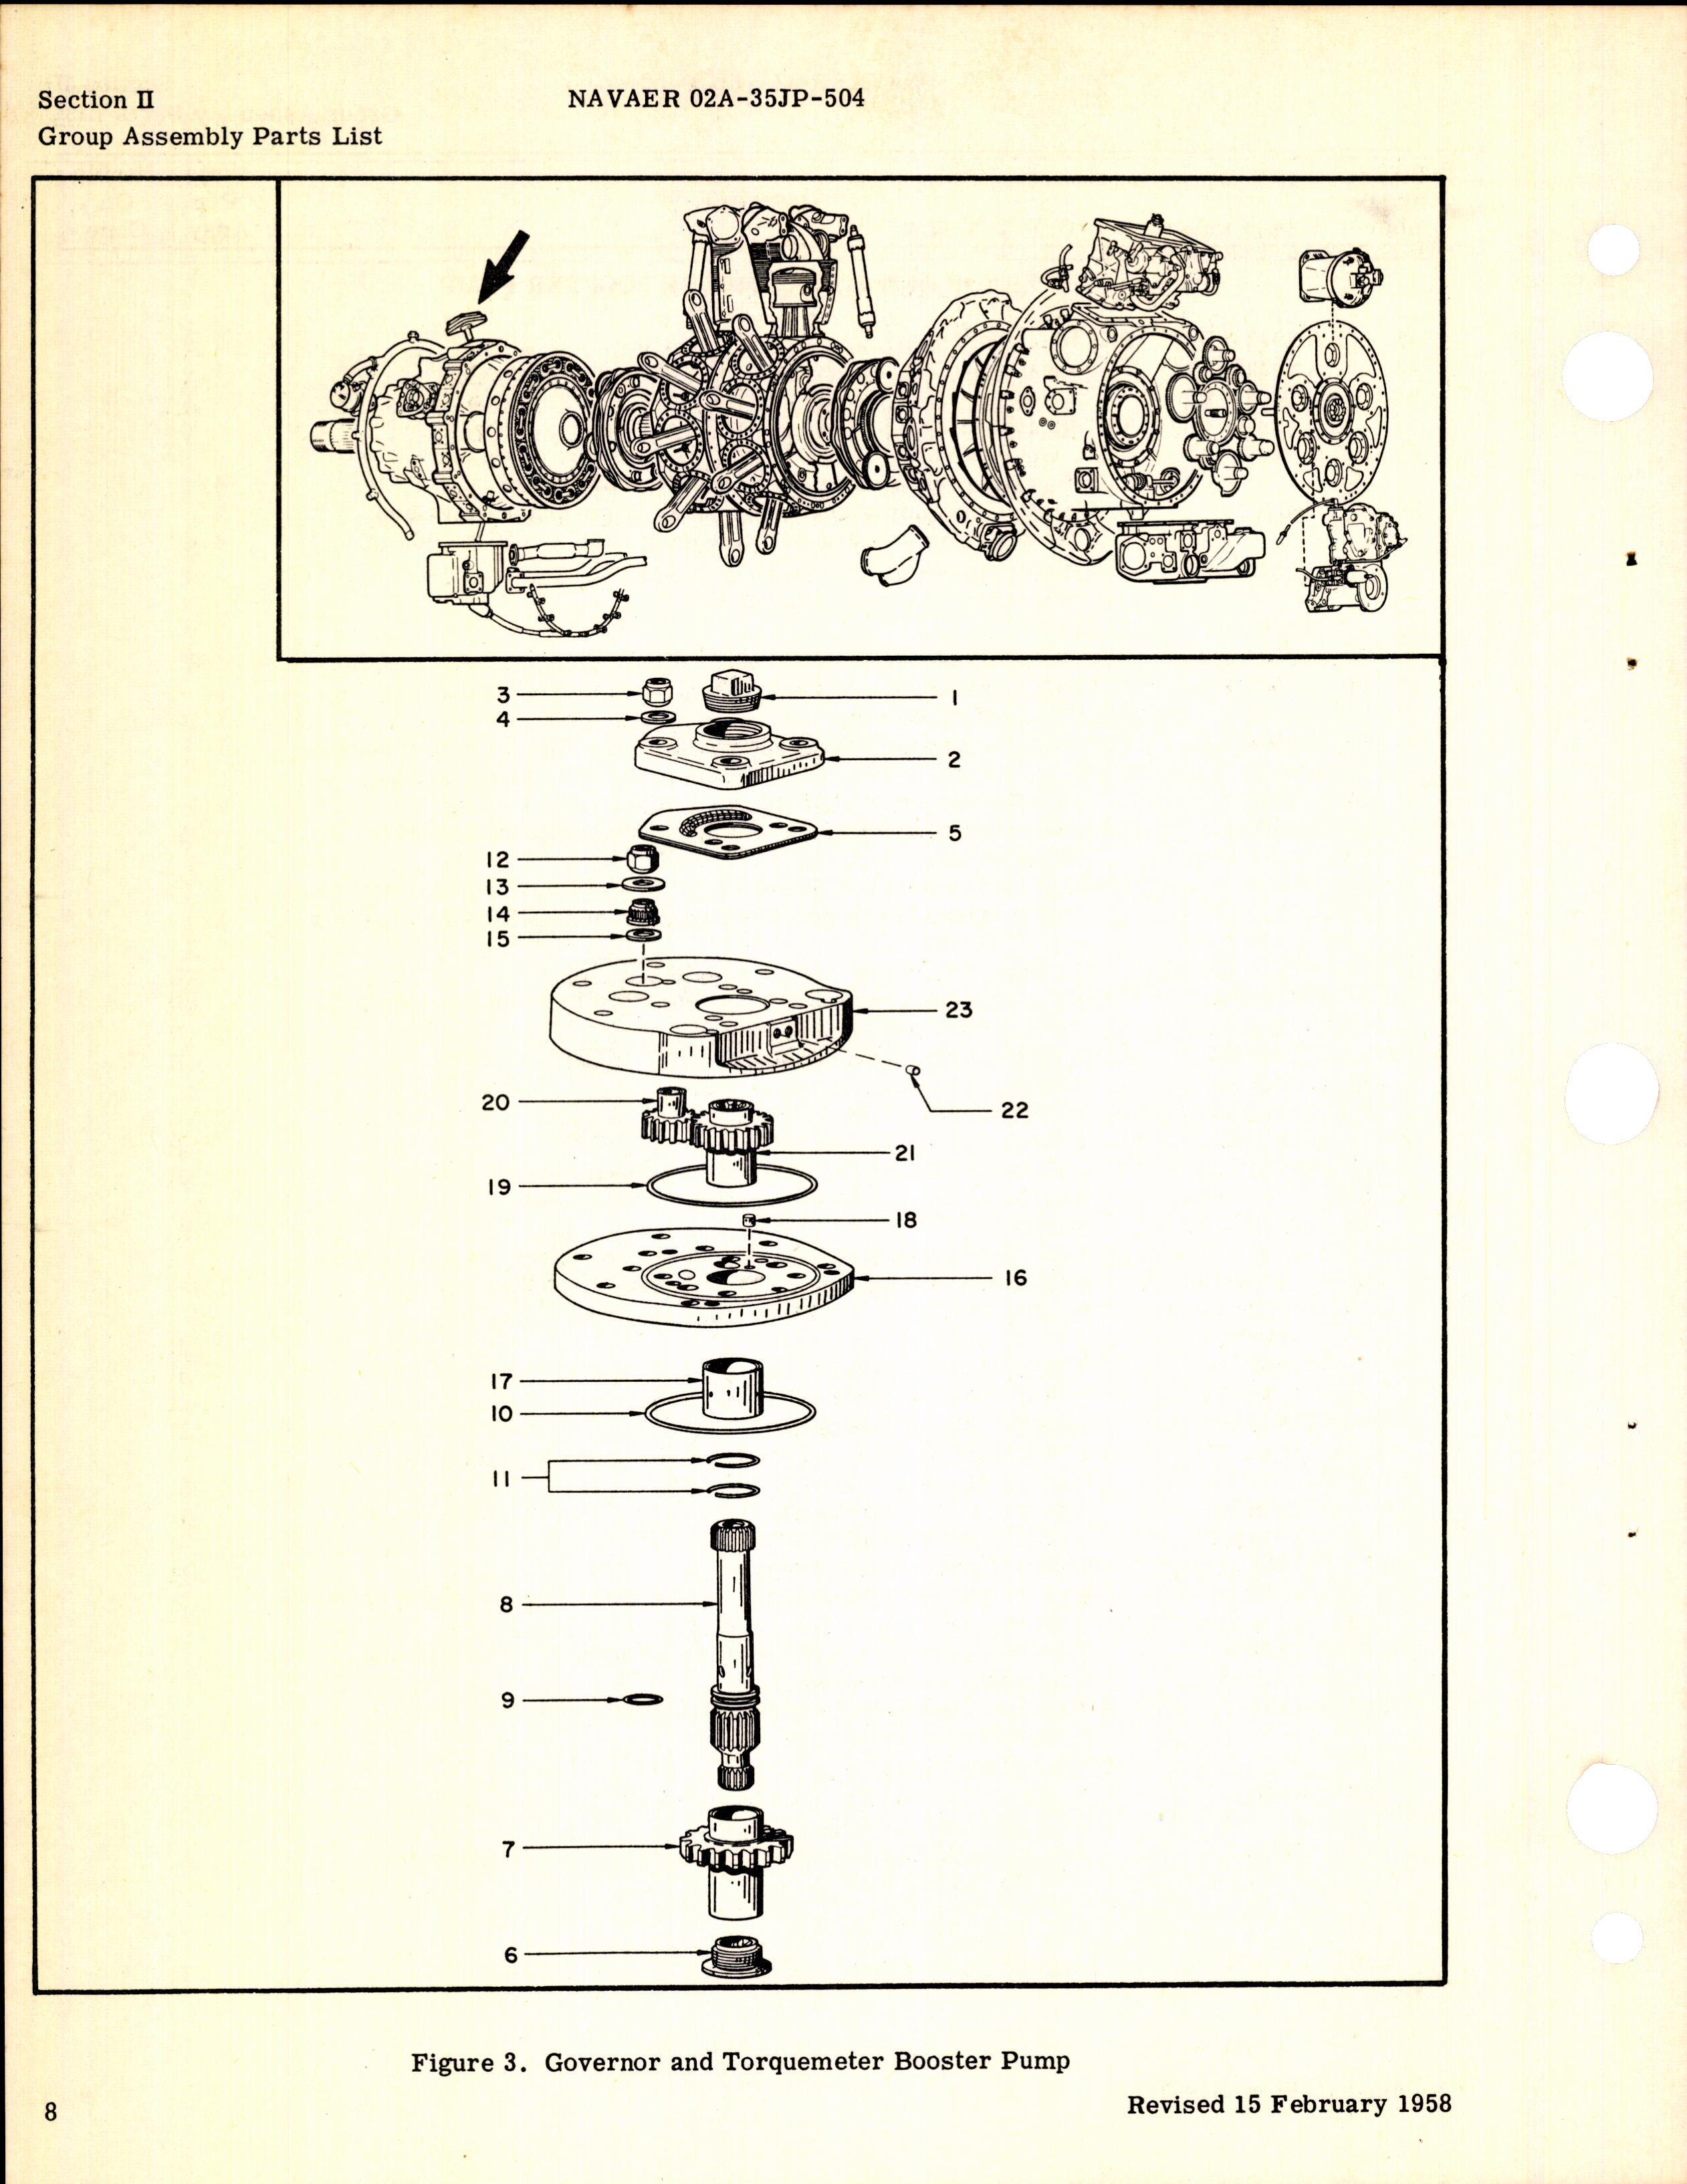 Sample page 8 from AirCorps Library document: Illustrated Parts Breakdown for R-3350-26WB Engine